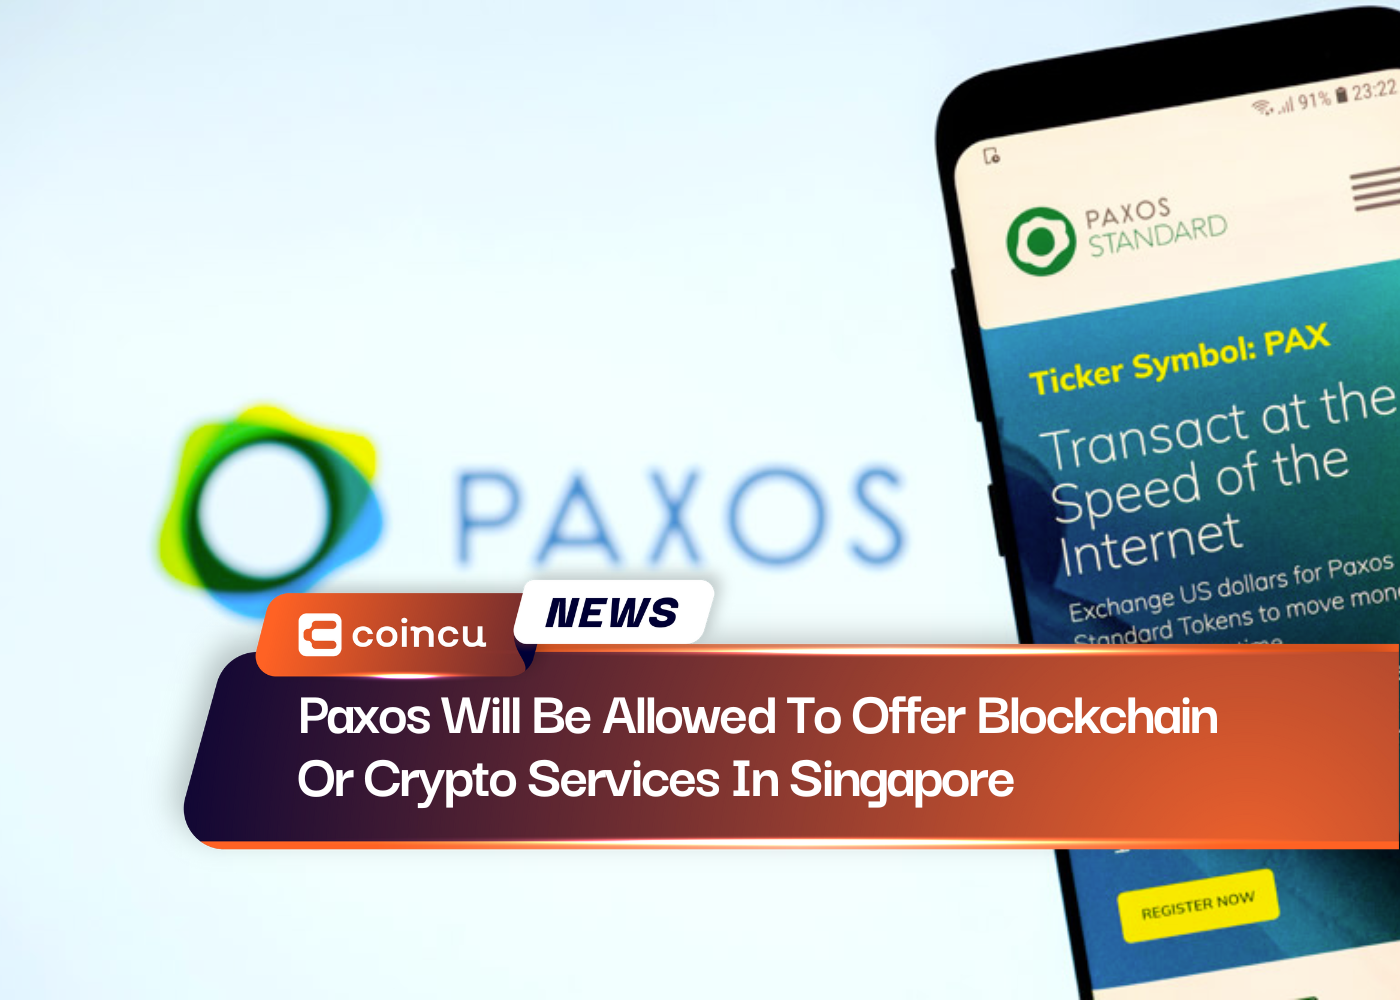 Paxos Will Be Allowed To Offer Blockchain Or Crypto Services In Singapore